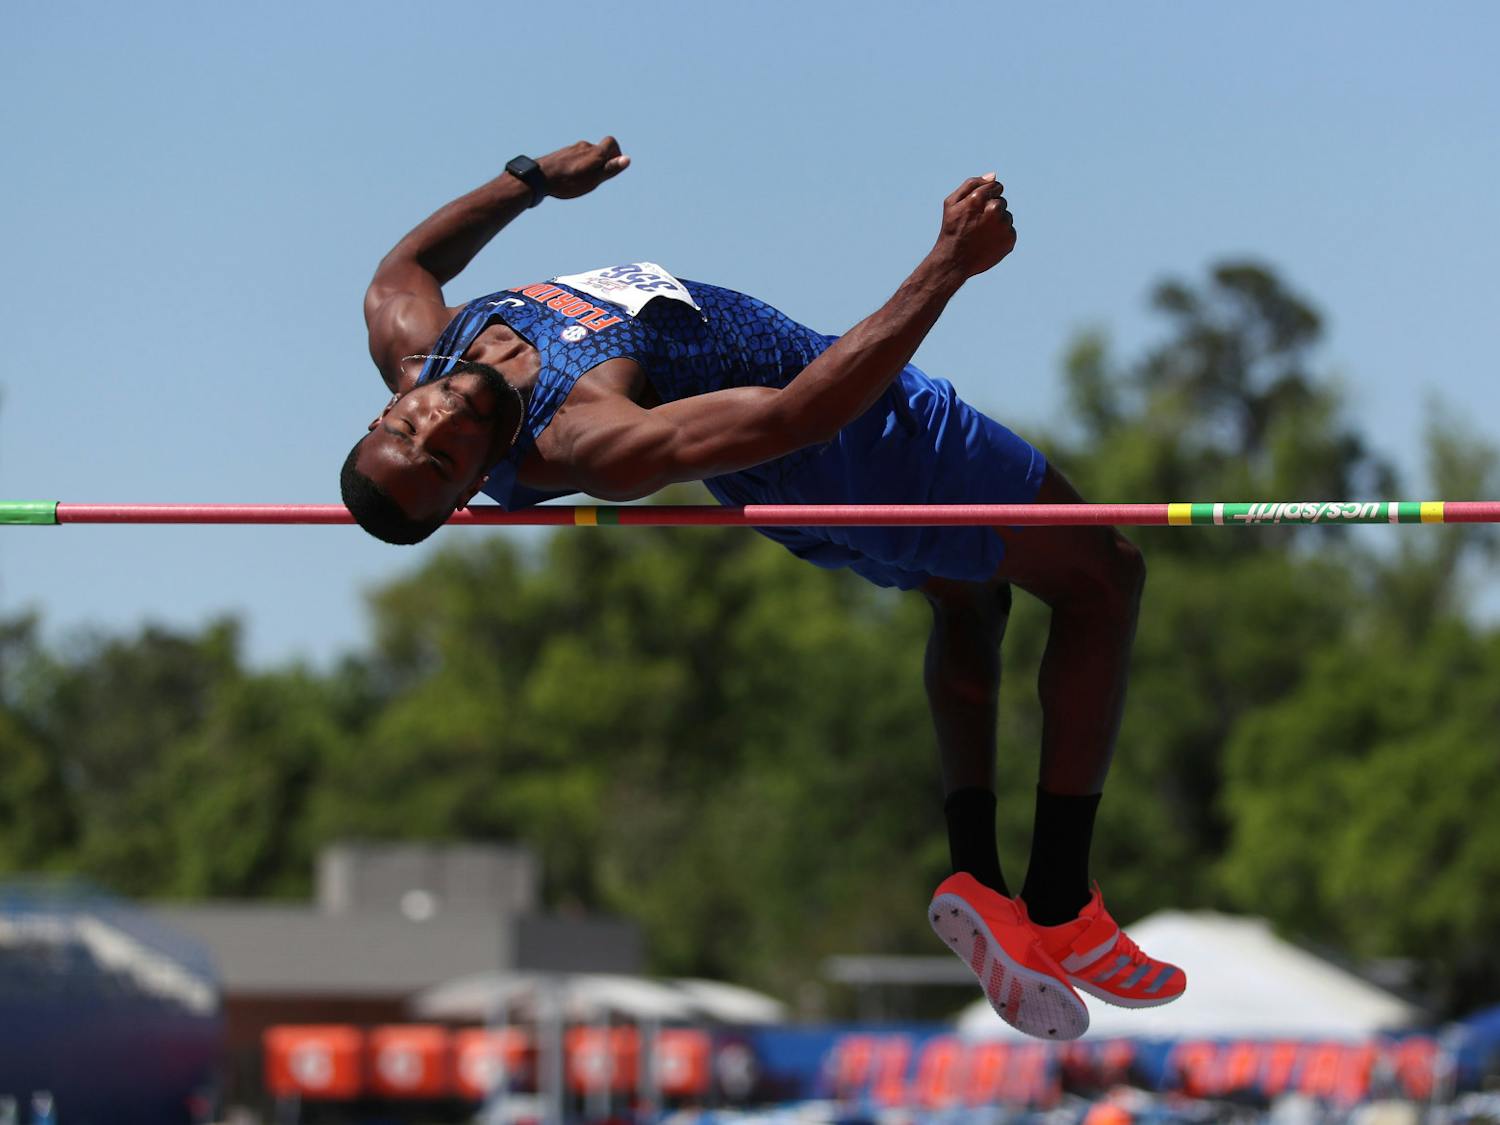 Clayton Brown vaults himself over the bar in the high jump during the Pepsi Florida Relays on Friday, April 2, 2021 at Percy Beard Track at James G. Pressly Stadium in Gainesville, Fla. / UAA Communications photo by Courtney Culbreath